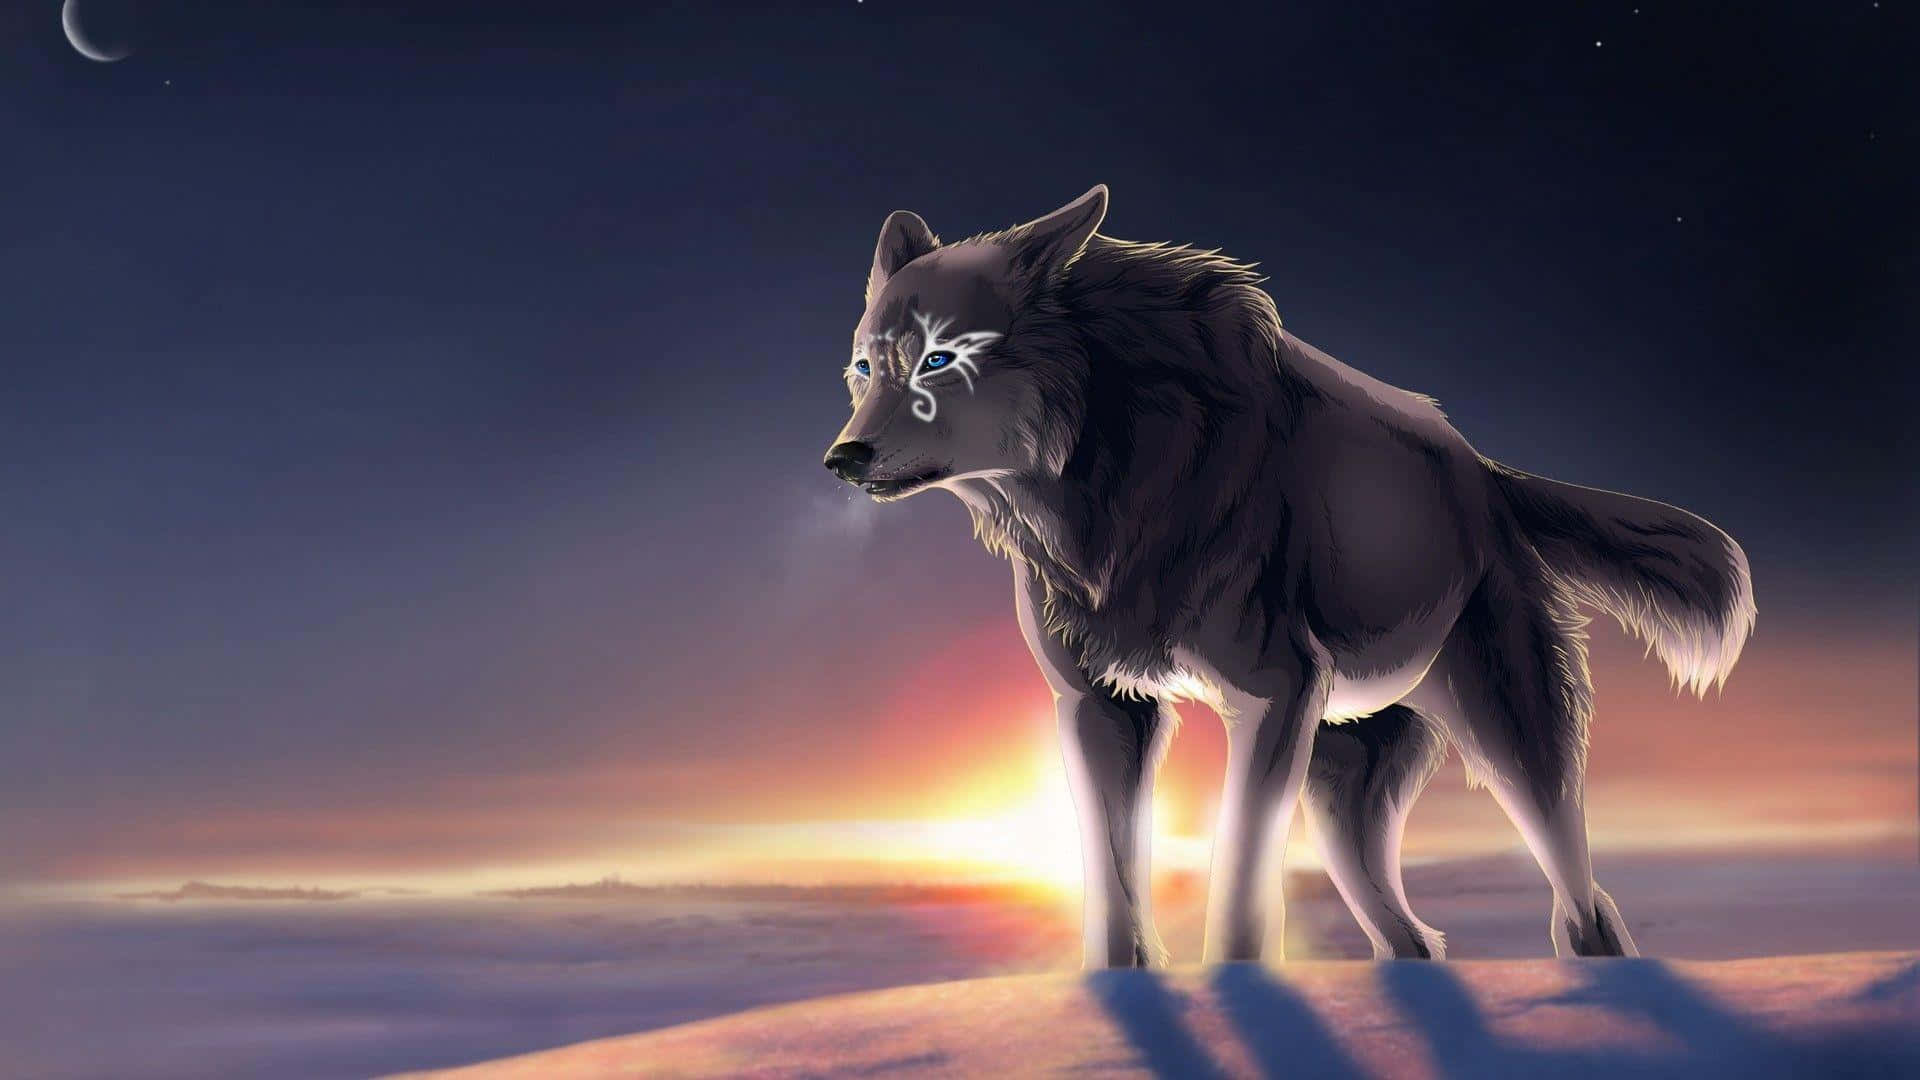 "The Galaxy Wolf looks upon the vastness of the night sky"